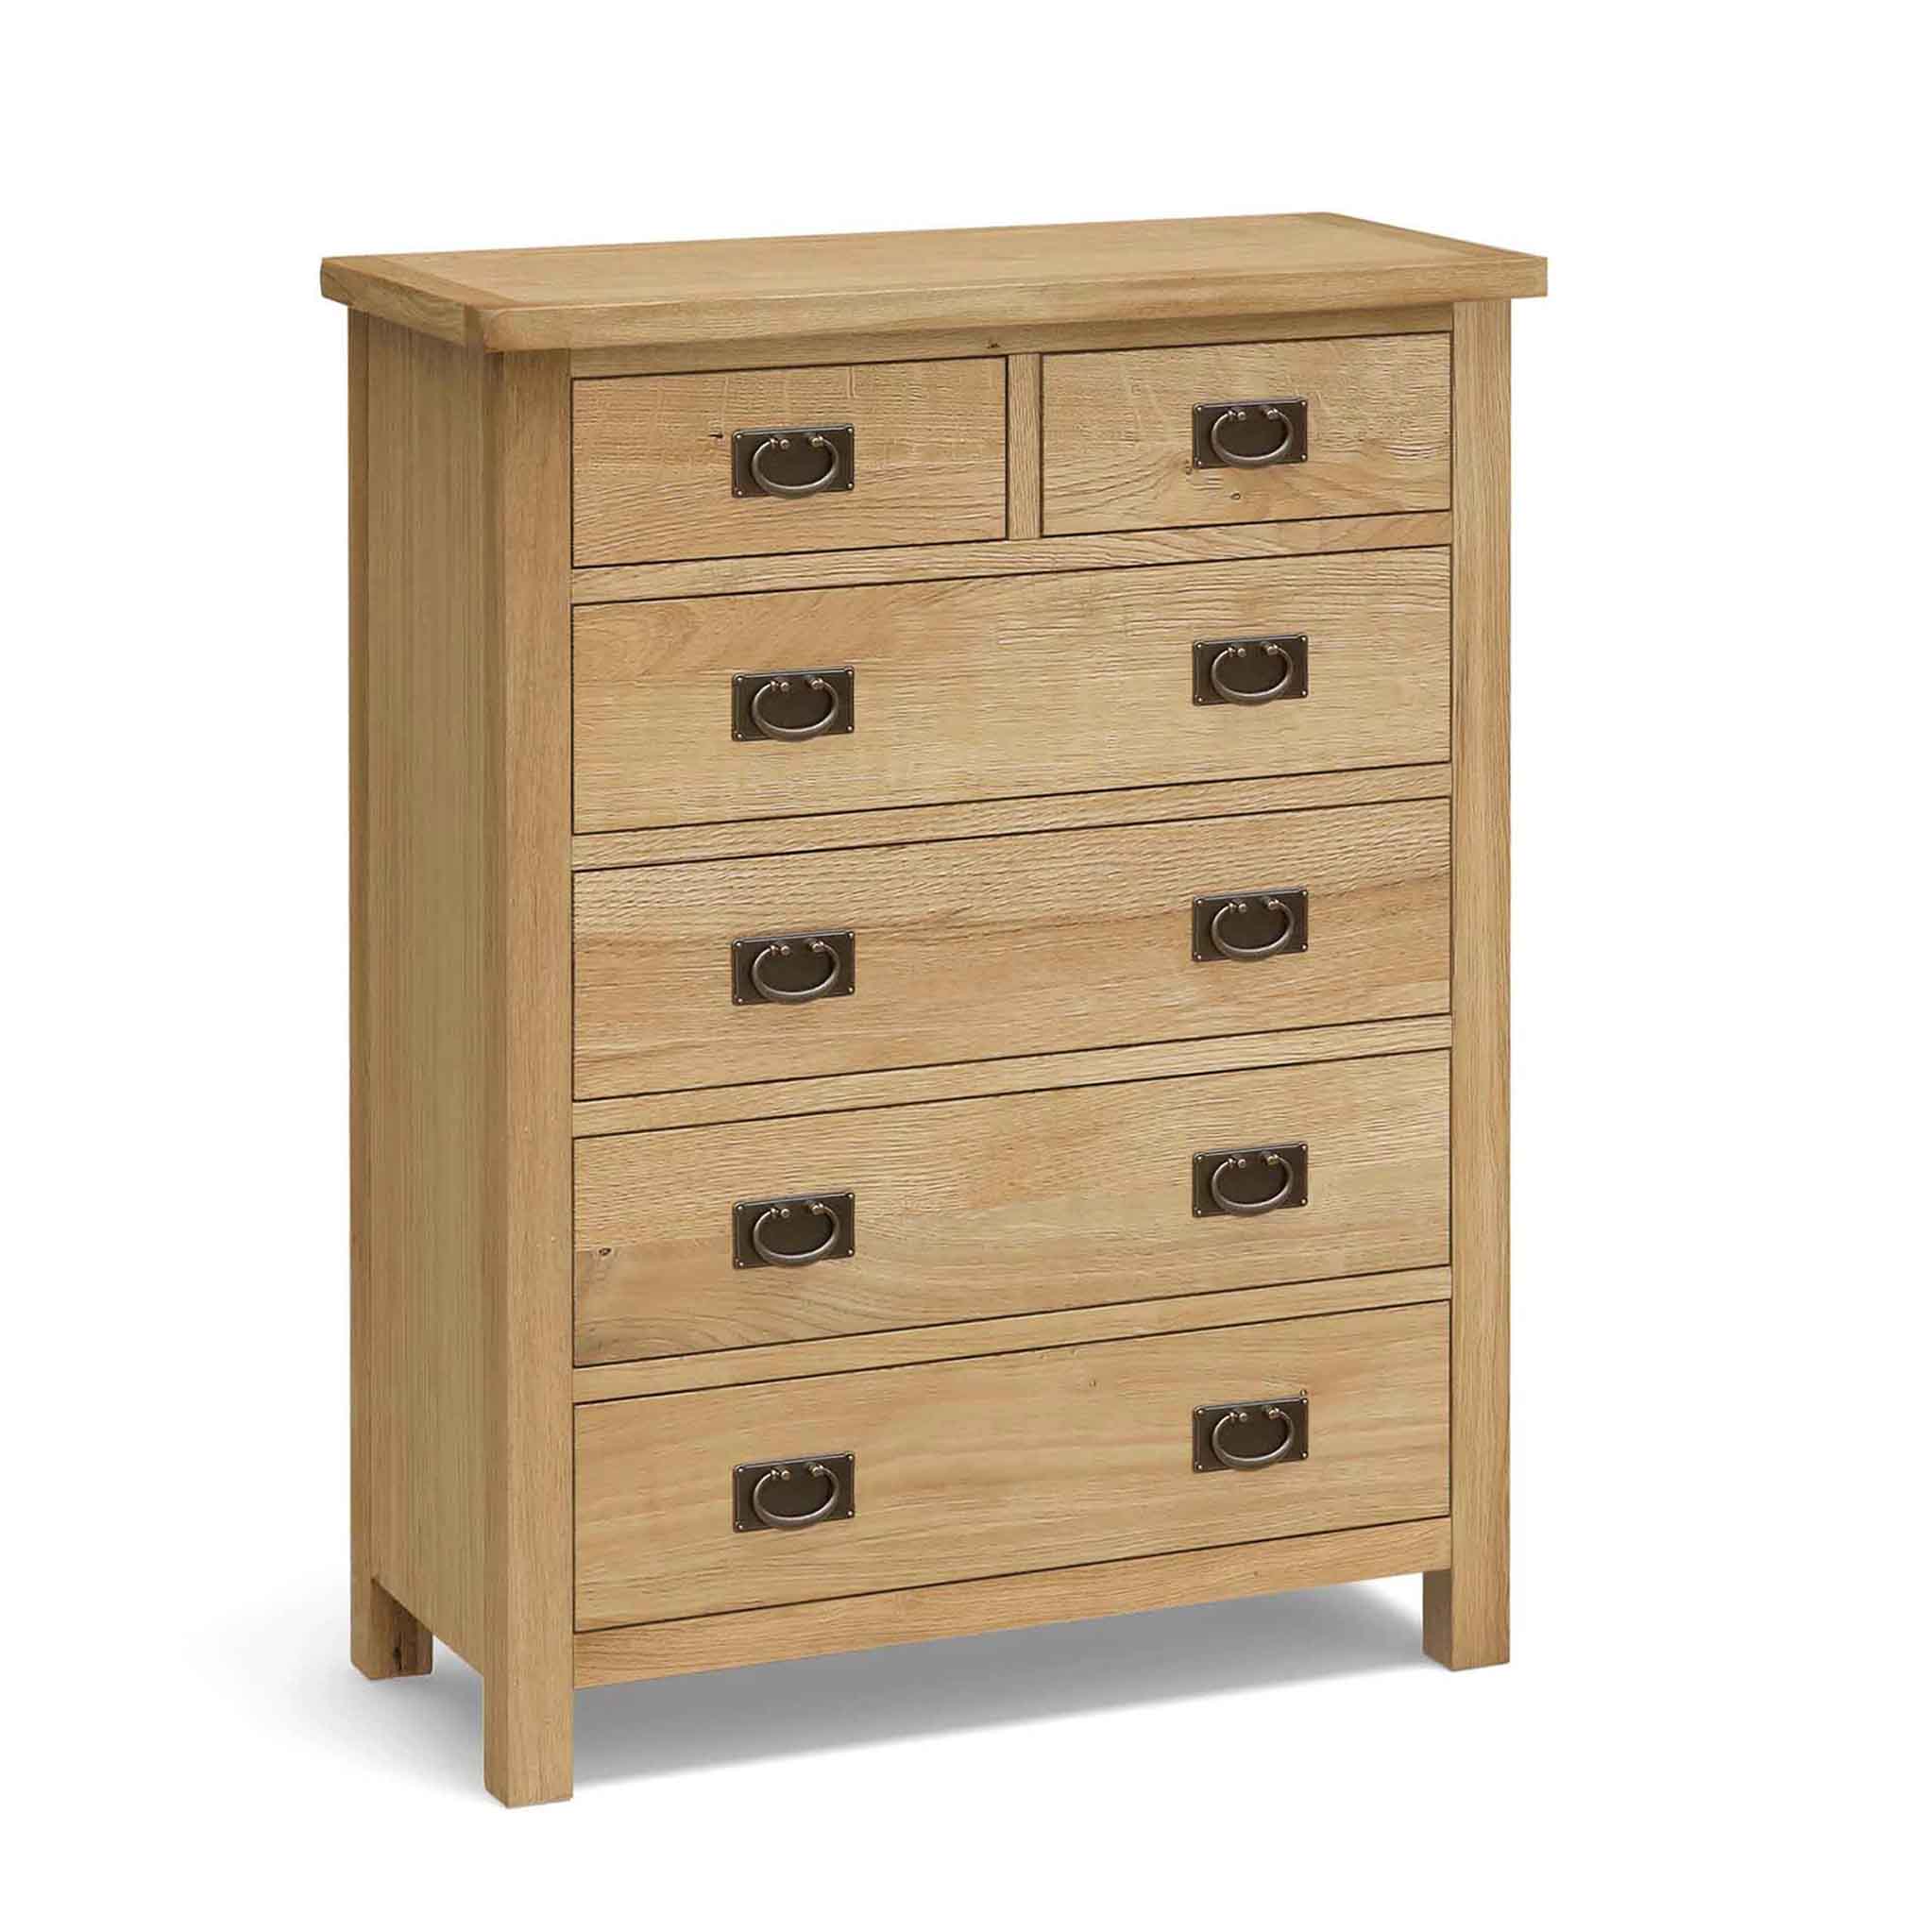 Surrey Oak 2 Over 4 Chest Of Drawers Rustic Waxed Oak